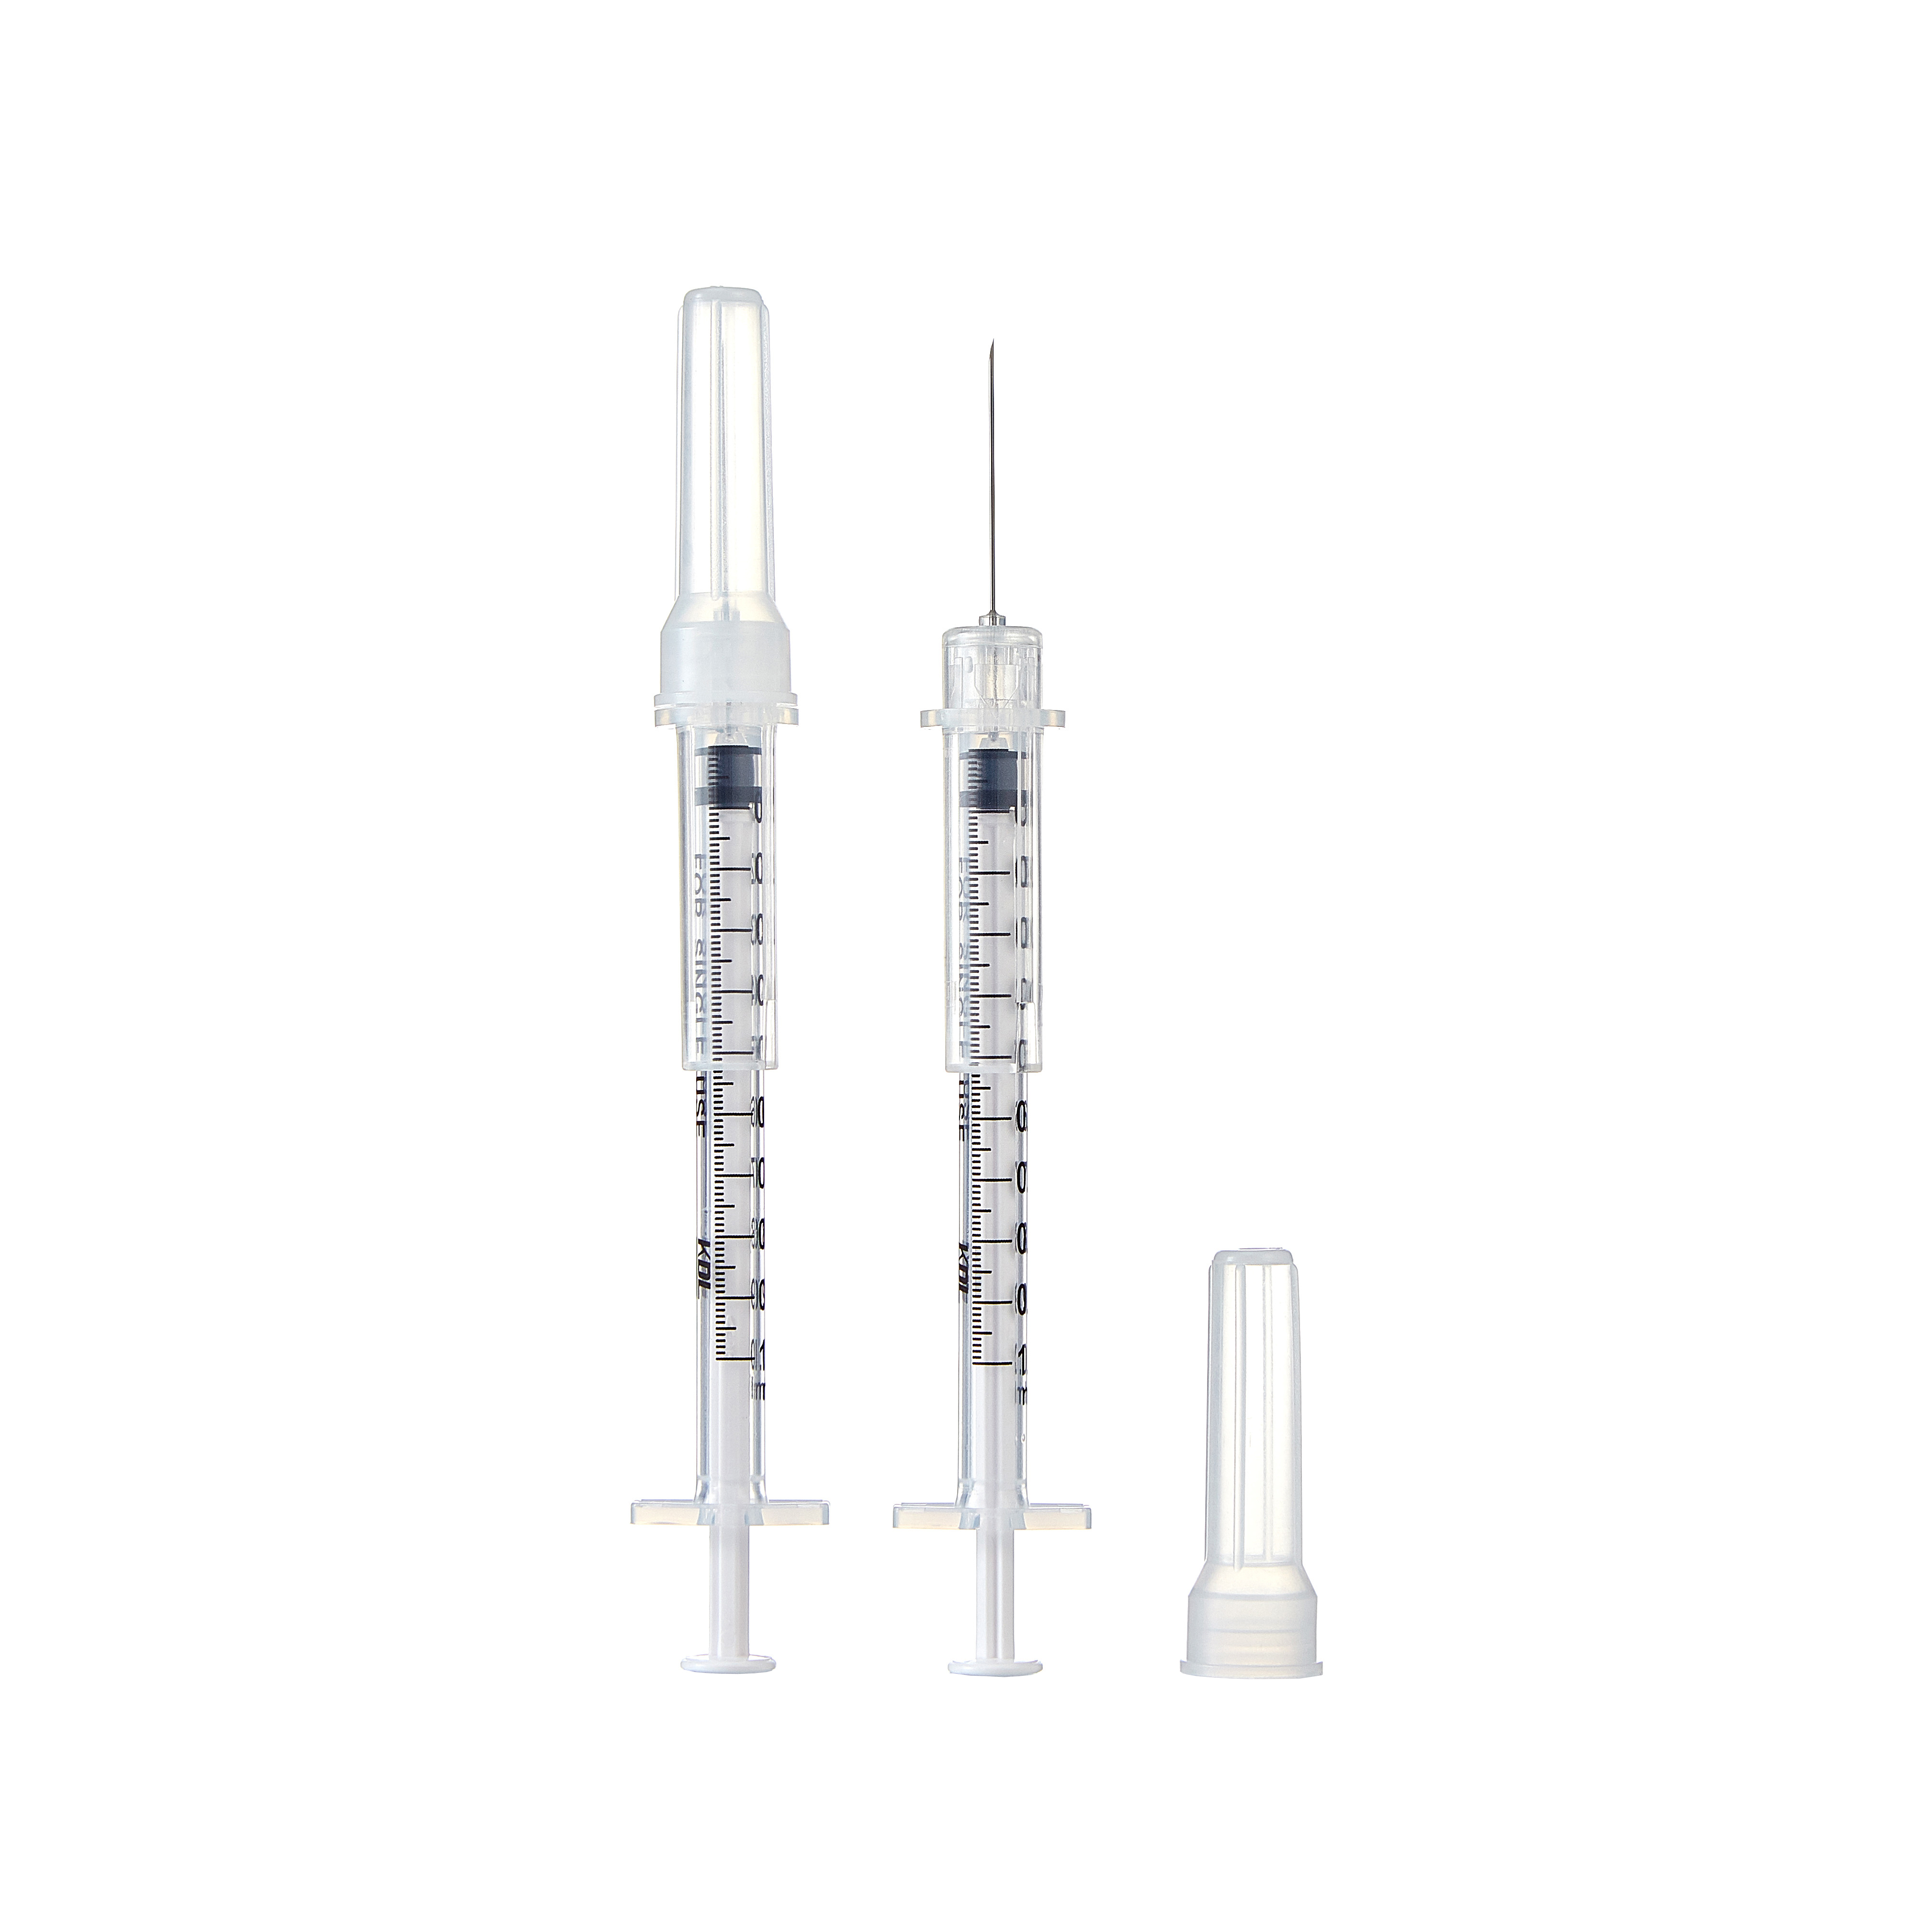 Sterile Safety Syringe for Single Use (Retractable)